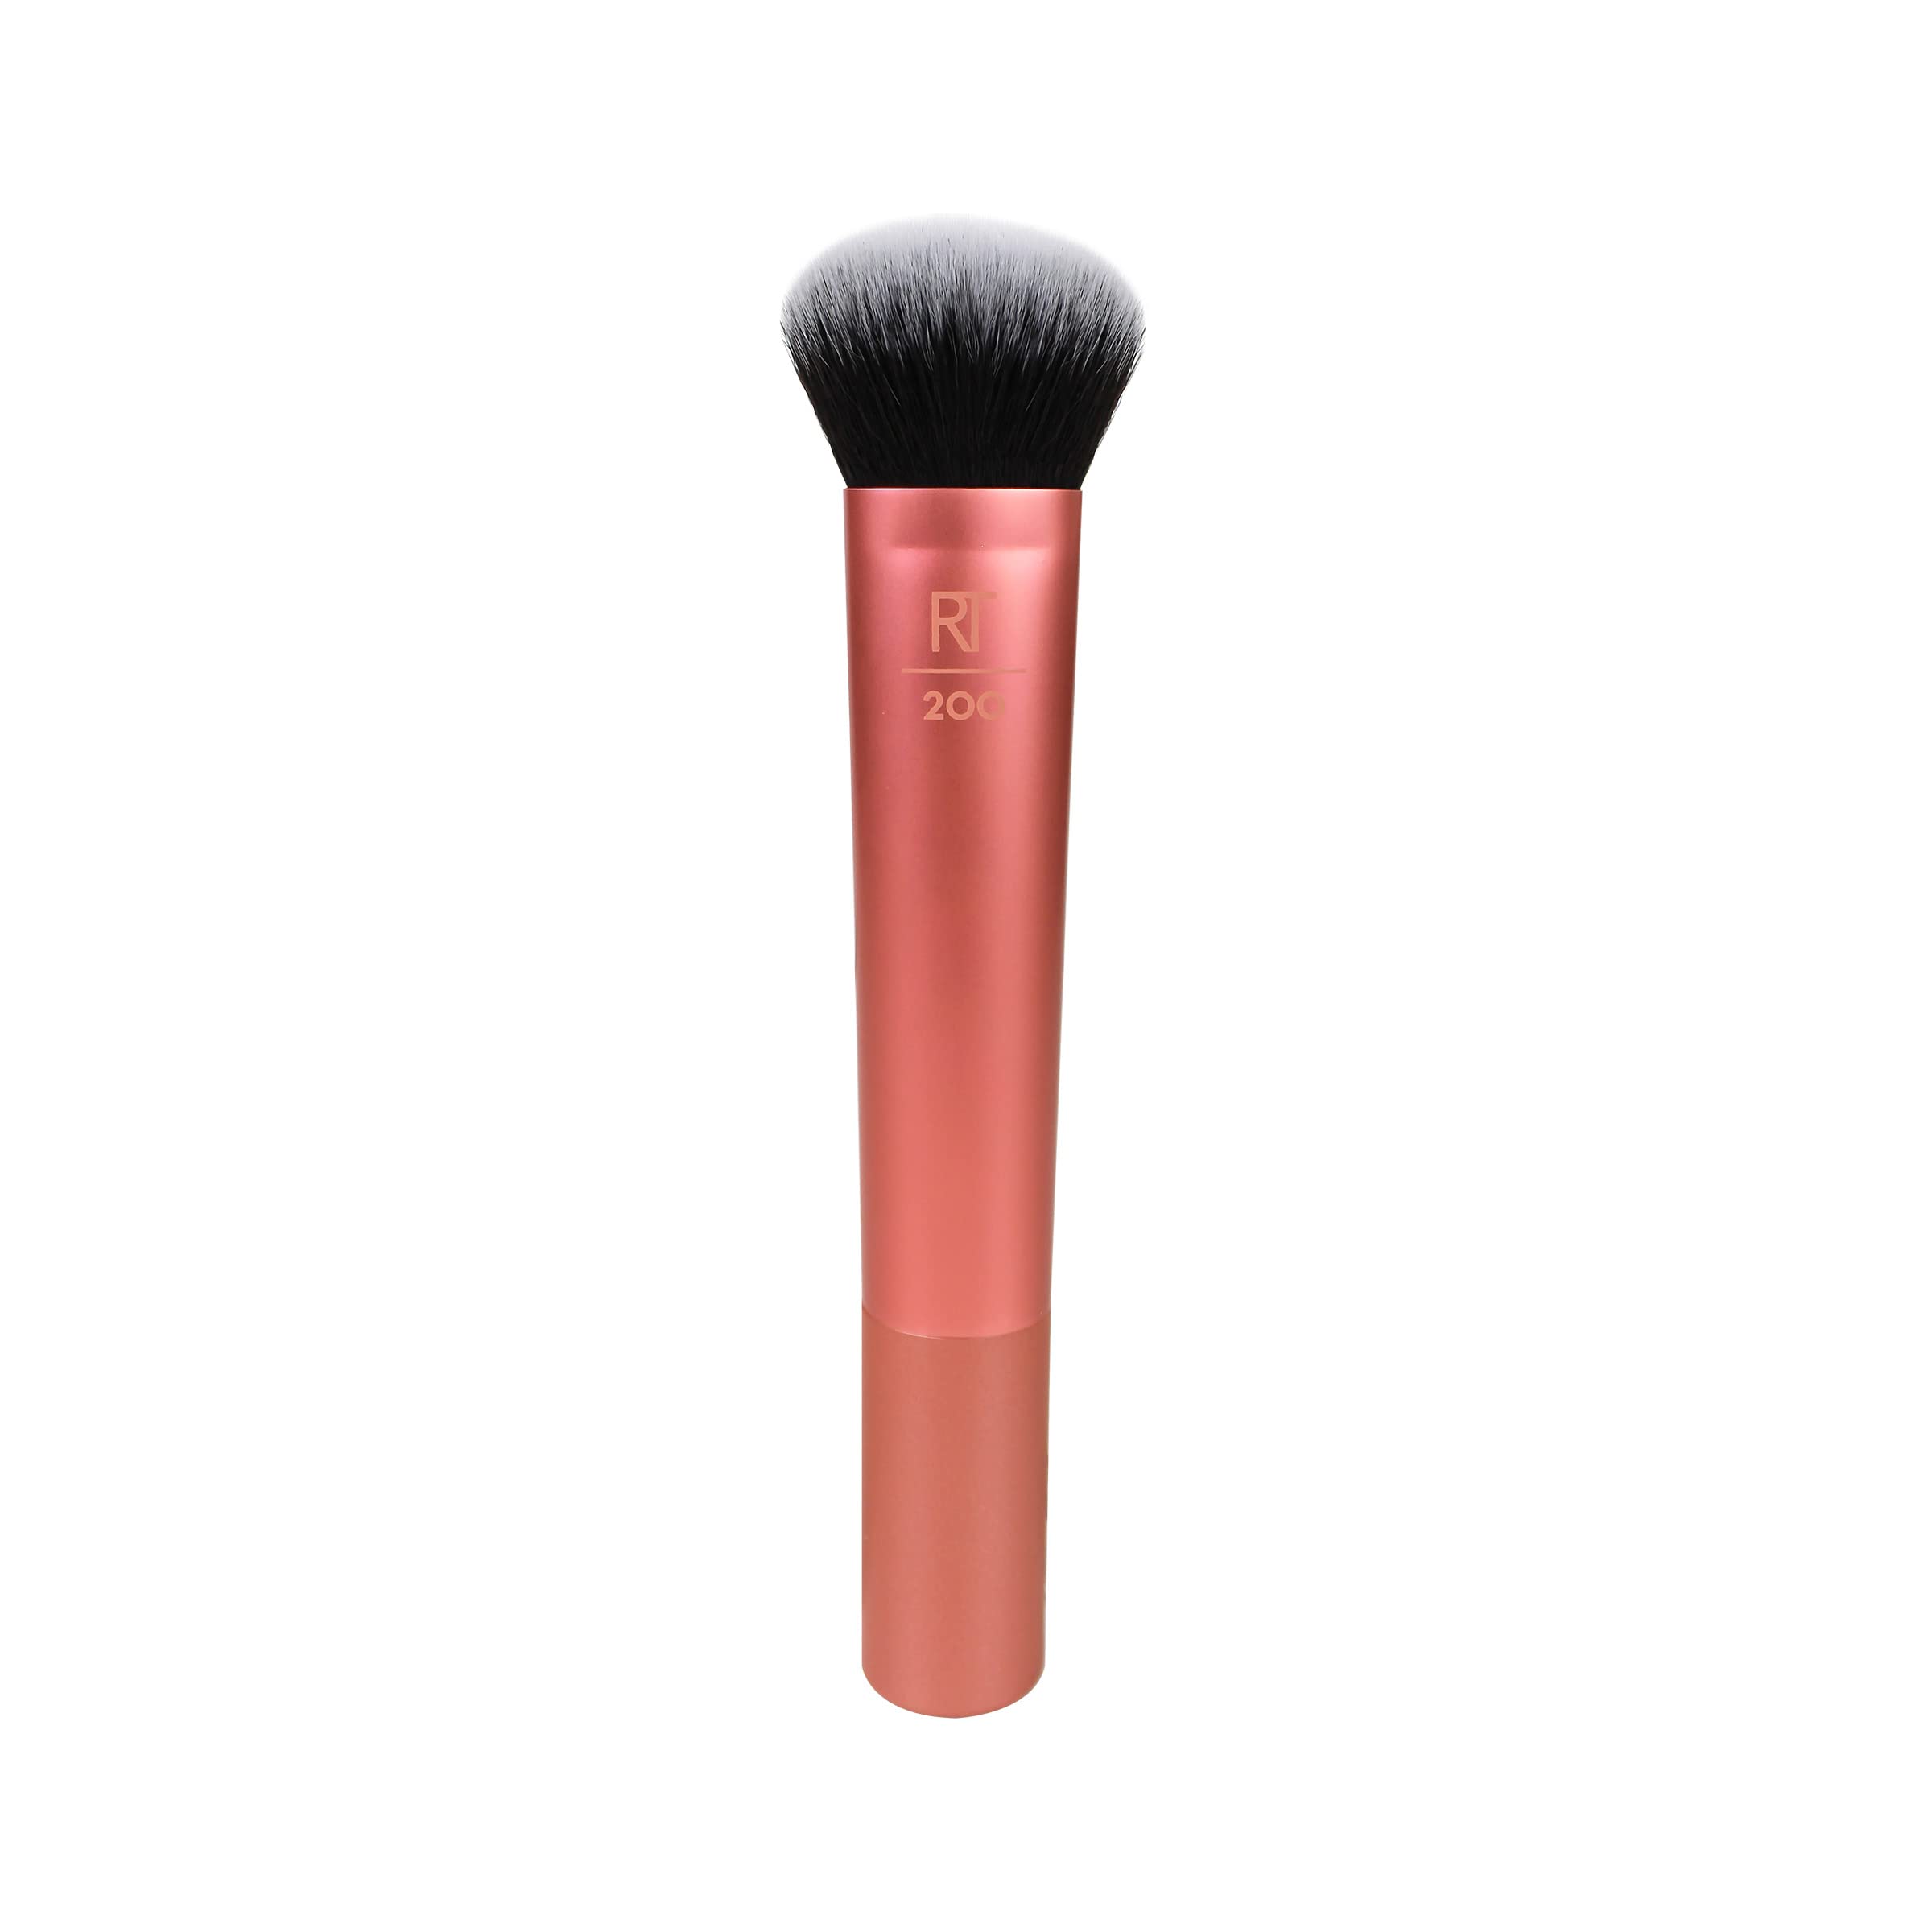 Real Techniques Expert Face Makeup Brush, For Liquid & Cream Foundation & Other Makeup Products, Buildable Coverage for Base Makeup, Dense, Synthetic Bristles, Vegan & Cruelty-Free, 1 Count